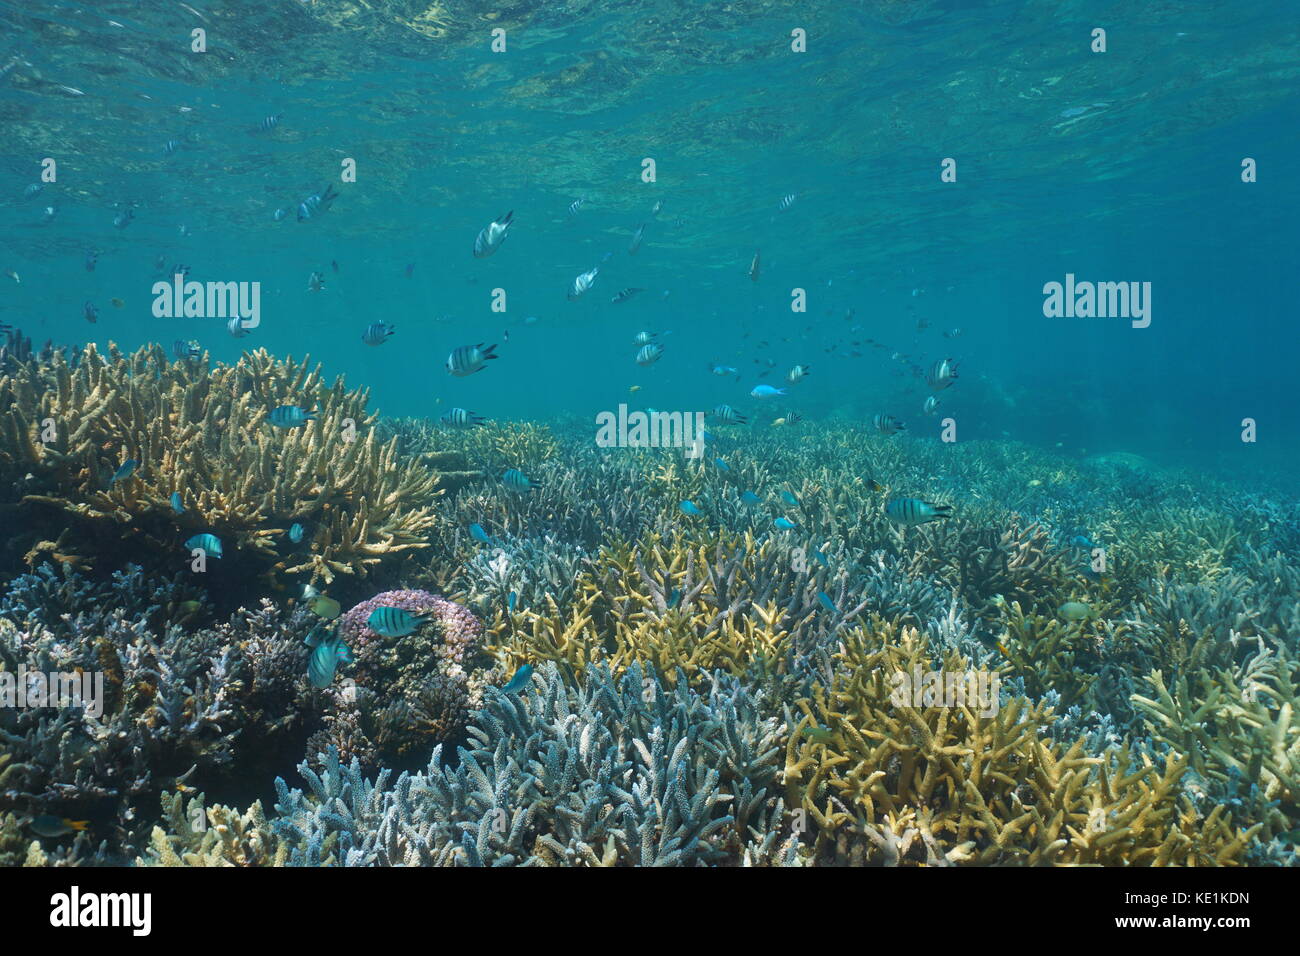 School of fish damselfish on a thriving coral reef underwater in the lagoon of Grand Terre island in New Caledonia, south Pacific ocean Stock Photo